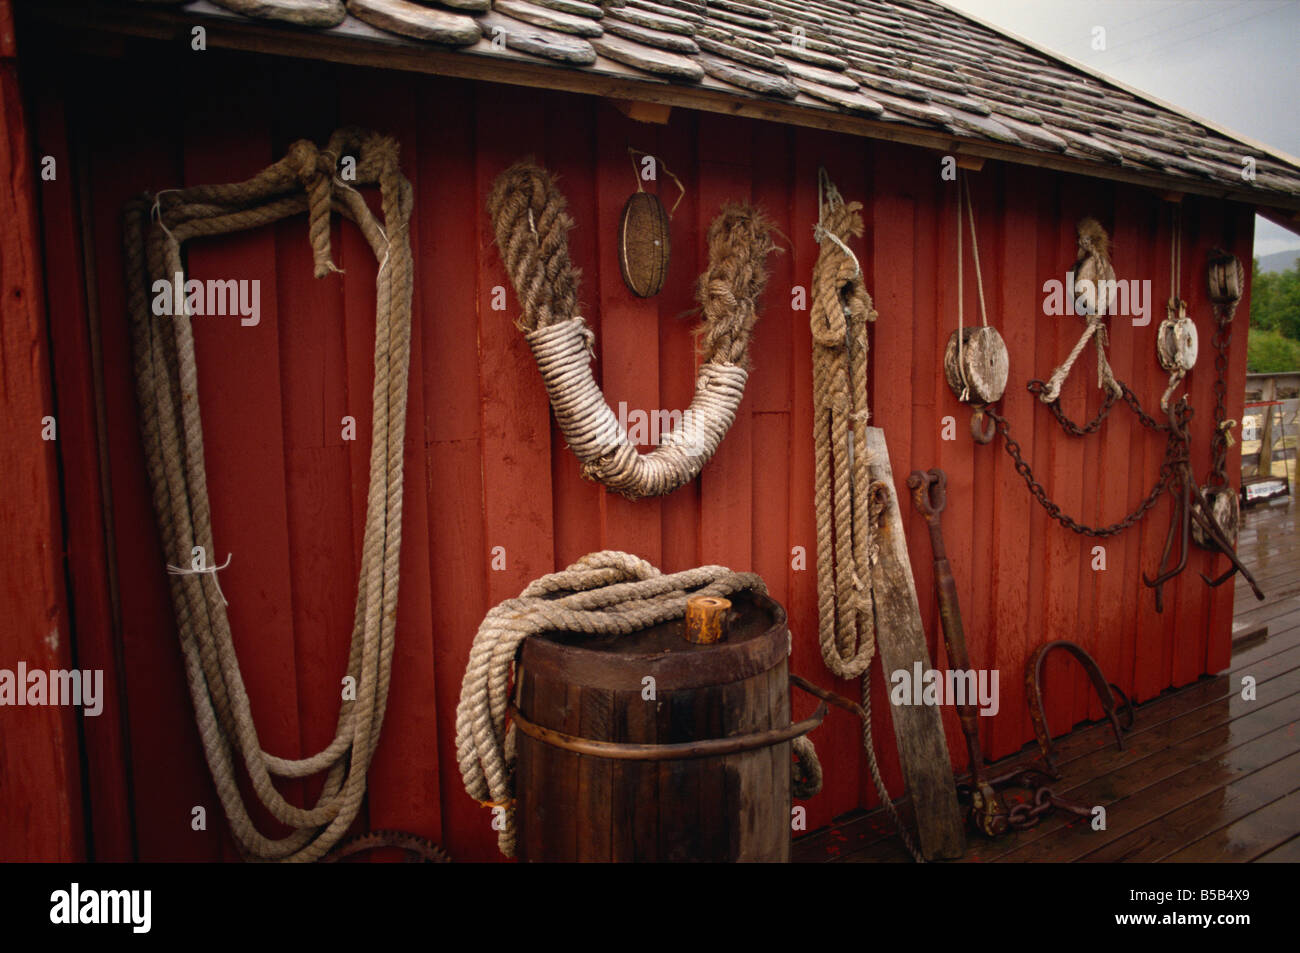 Fishing tackle decorates fishing centre at Salmon Islands in the north of the country Norway Scandinavia Europe Stock Photo